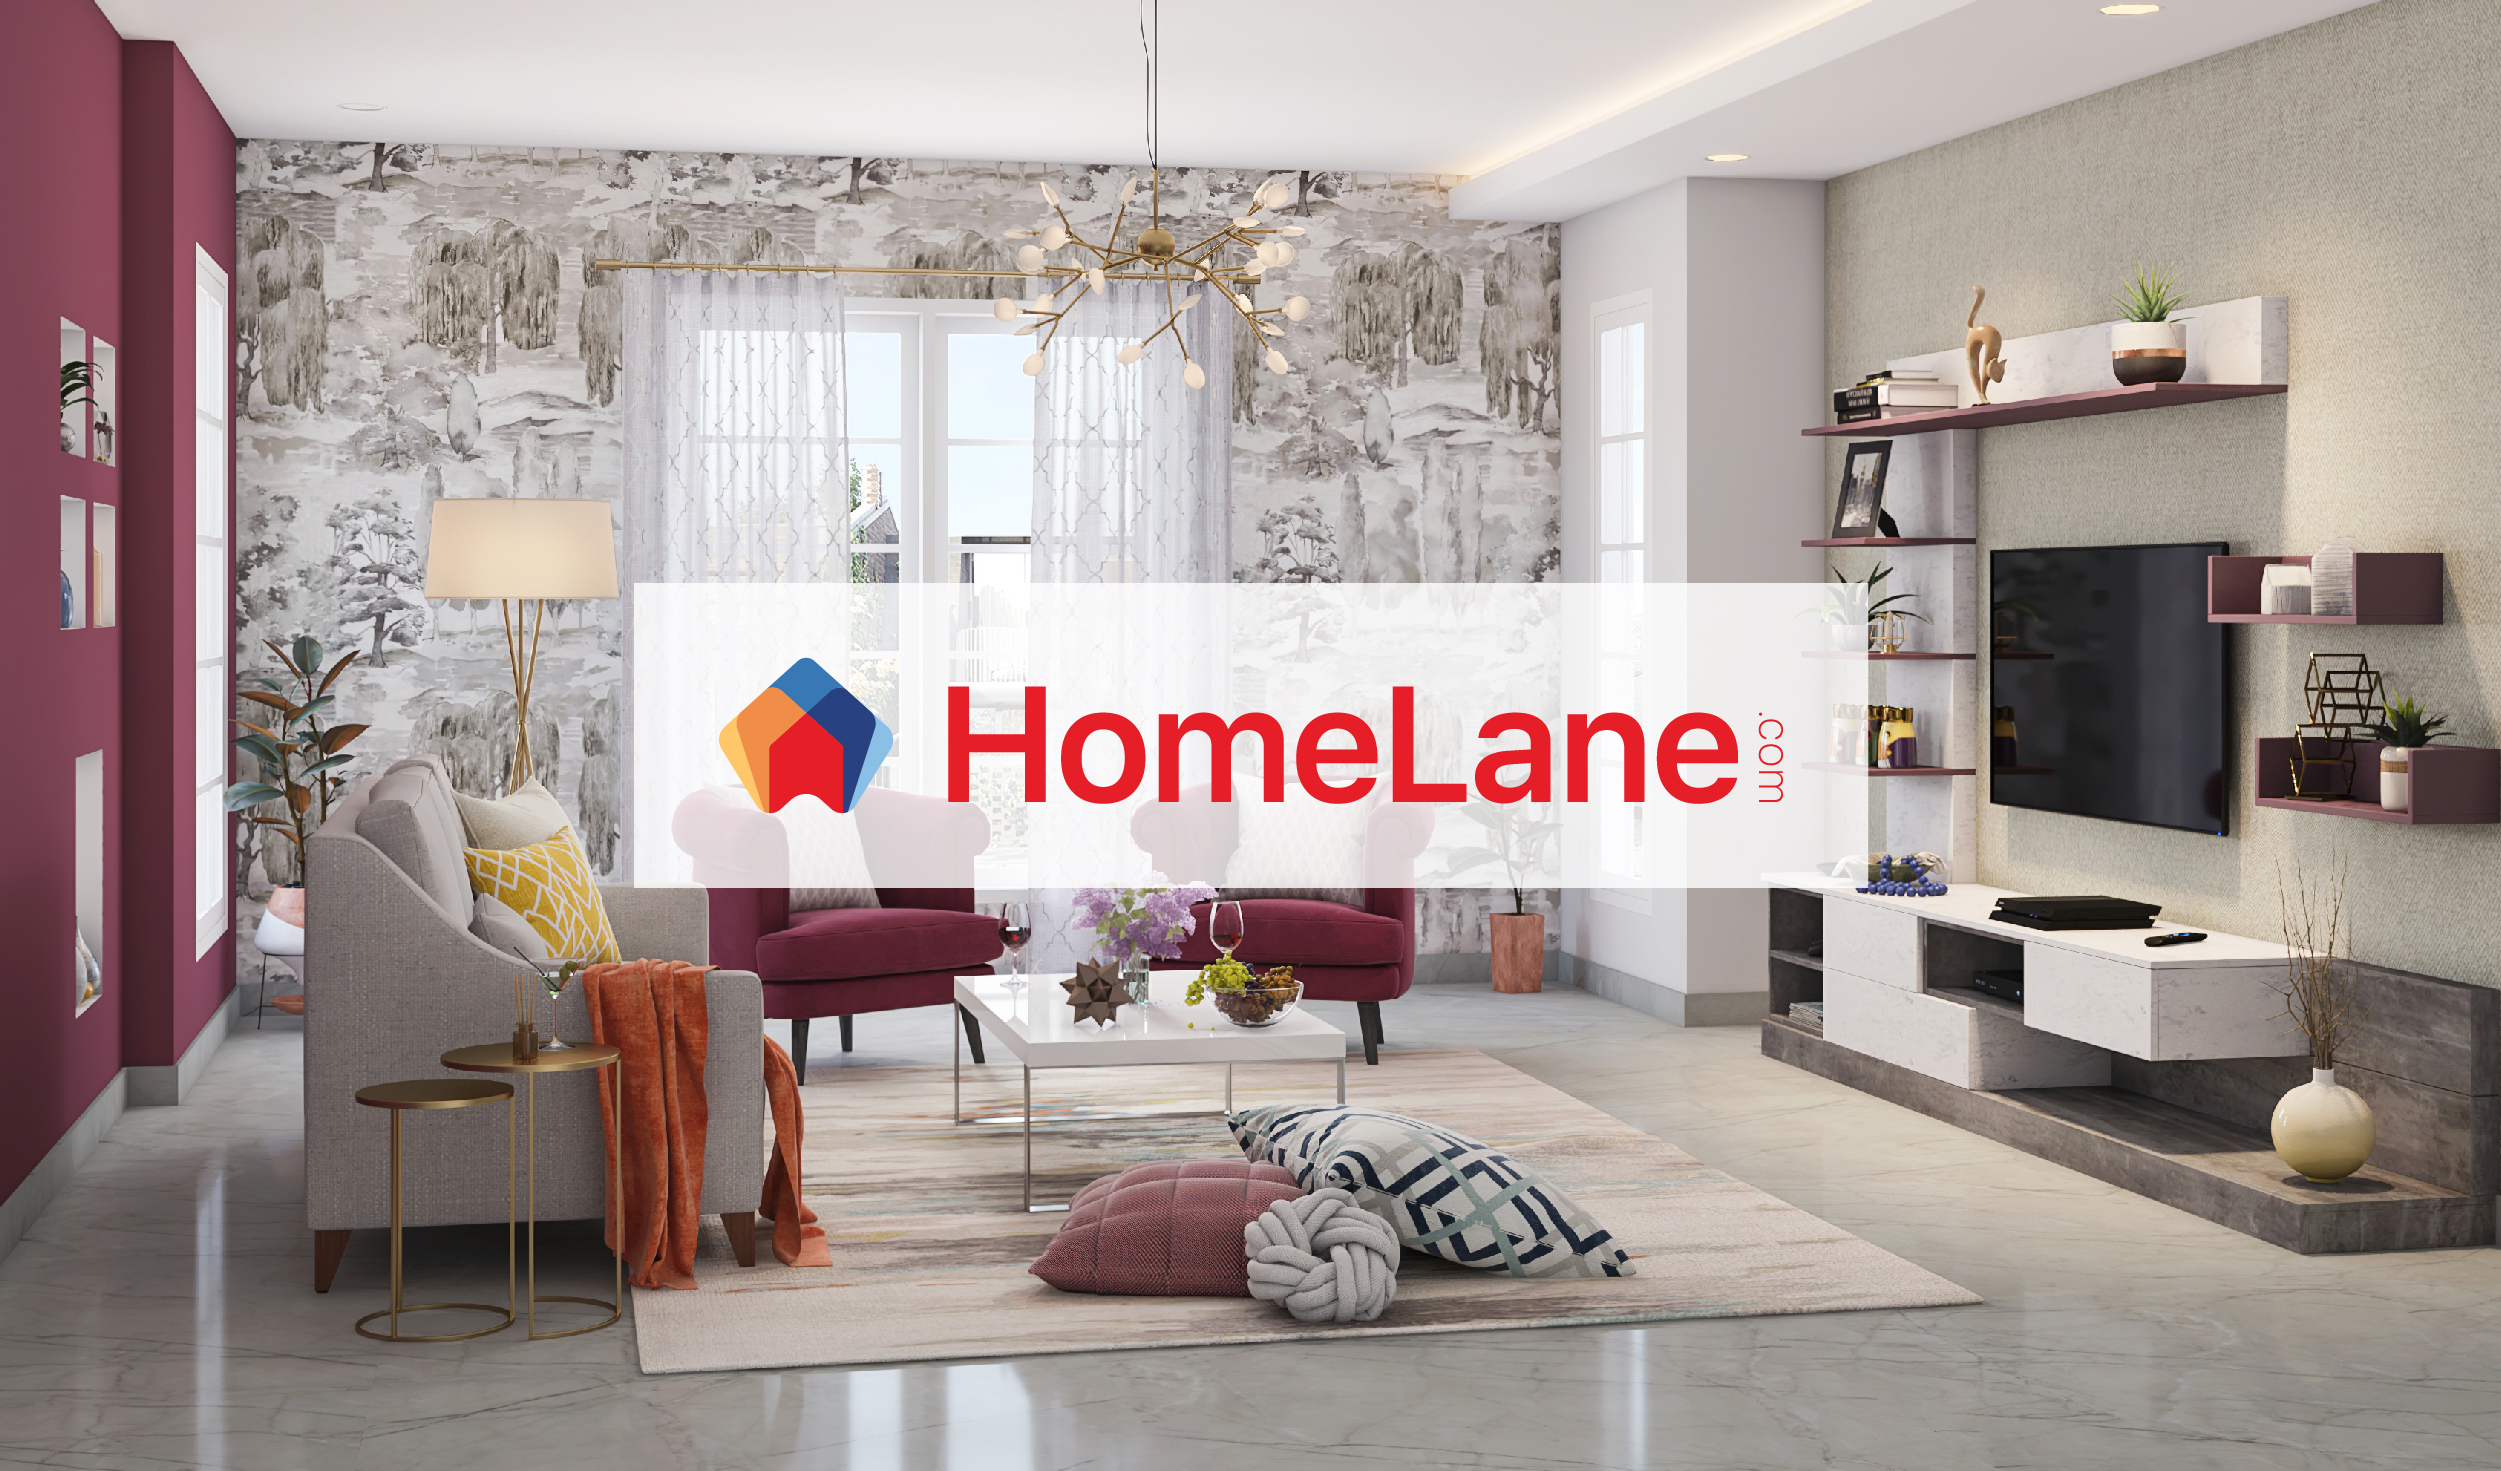 HomeLane Secures INR 75 Crore in Bridge Round Funding to Enhance Home Interior Solutions